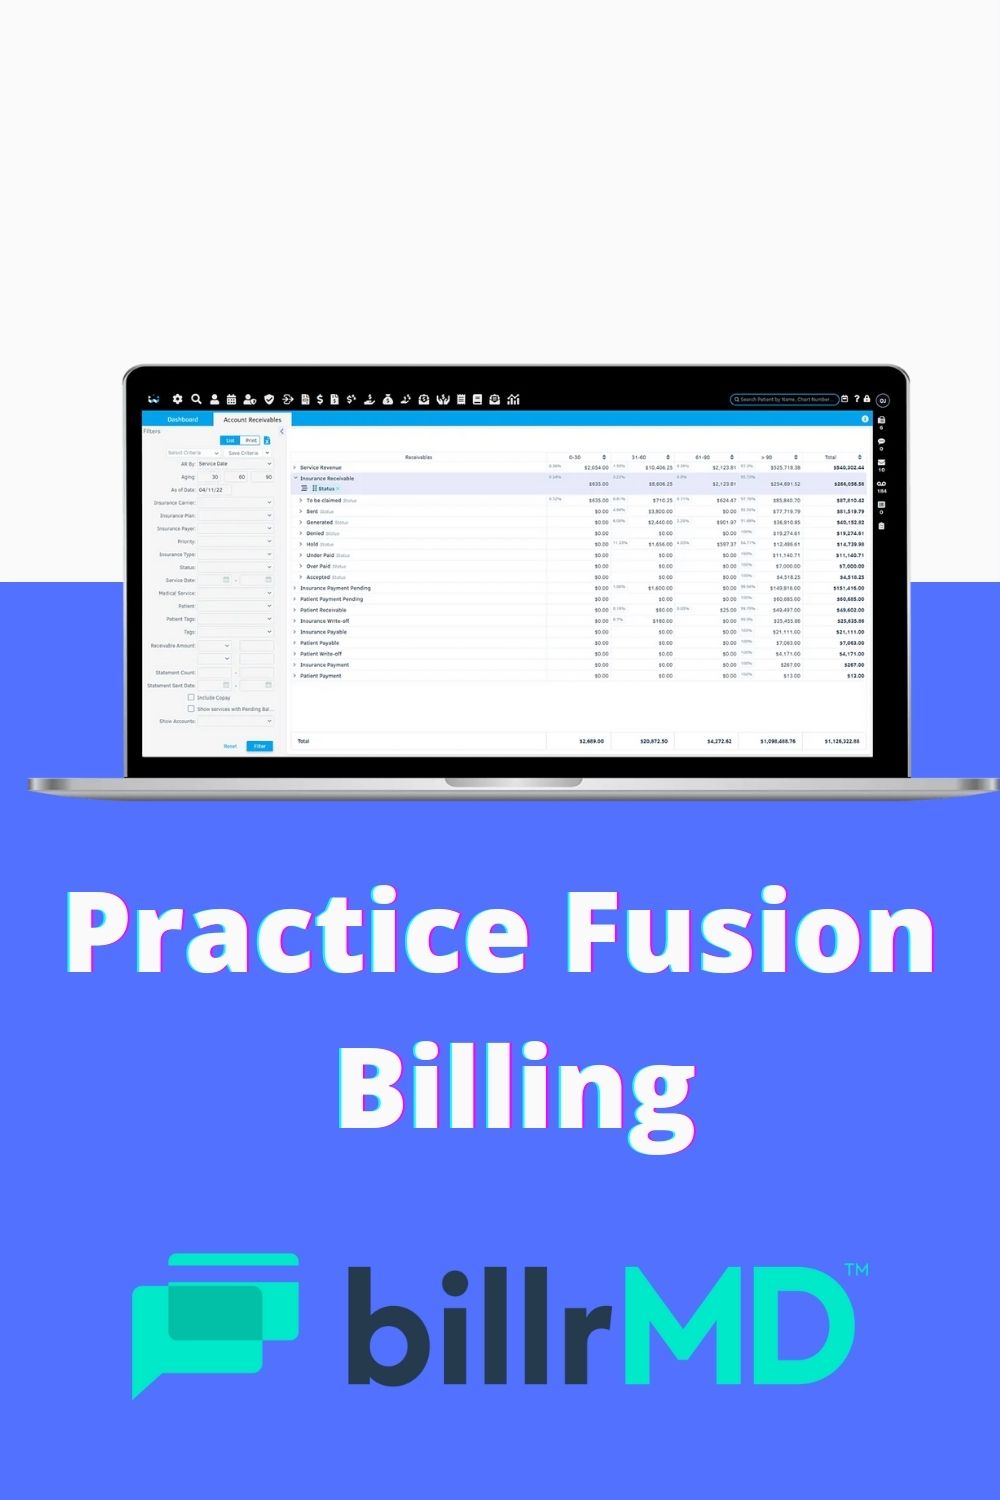 practice fusion billing-7a182a17